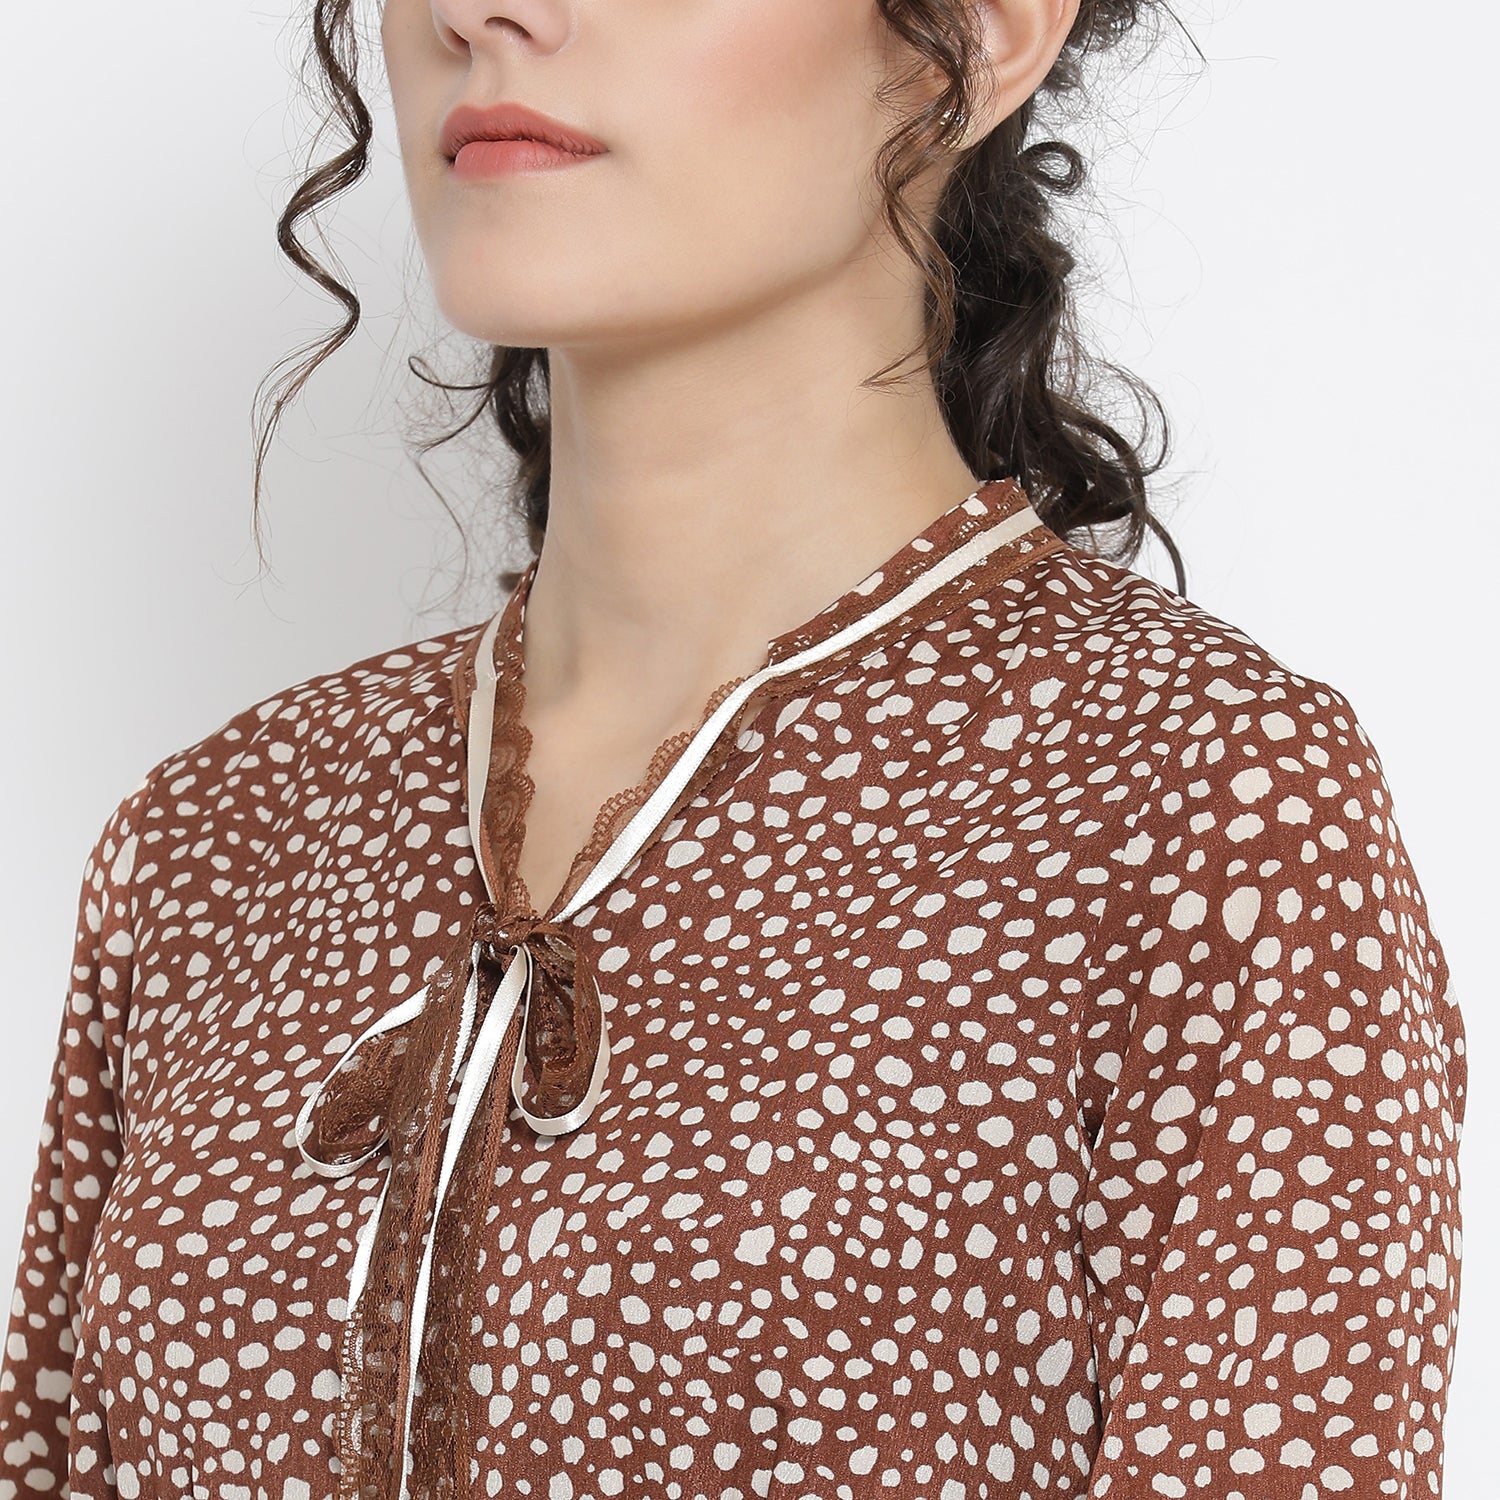 Brown Animal Print Bias Dress With French Lace And Ribbon Tie Up